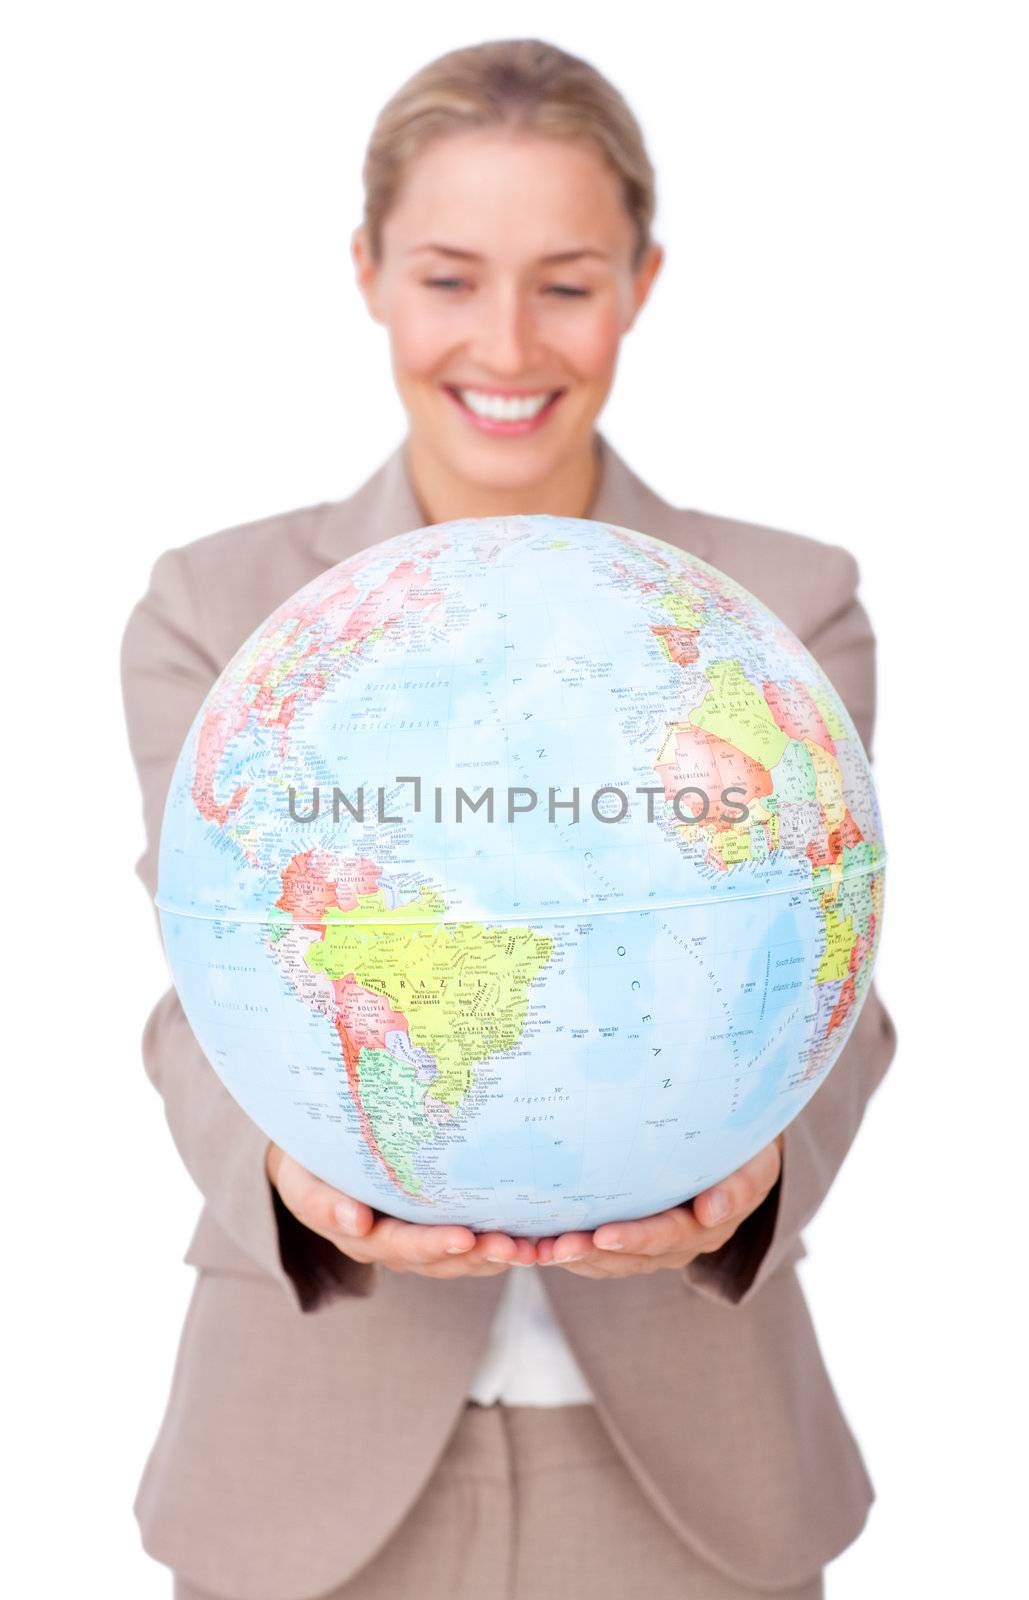 Charismatic businesswoman smiling at global business expansion against a white background